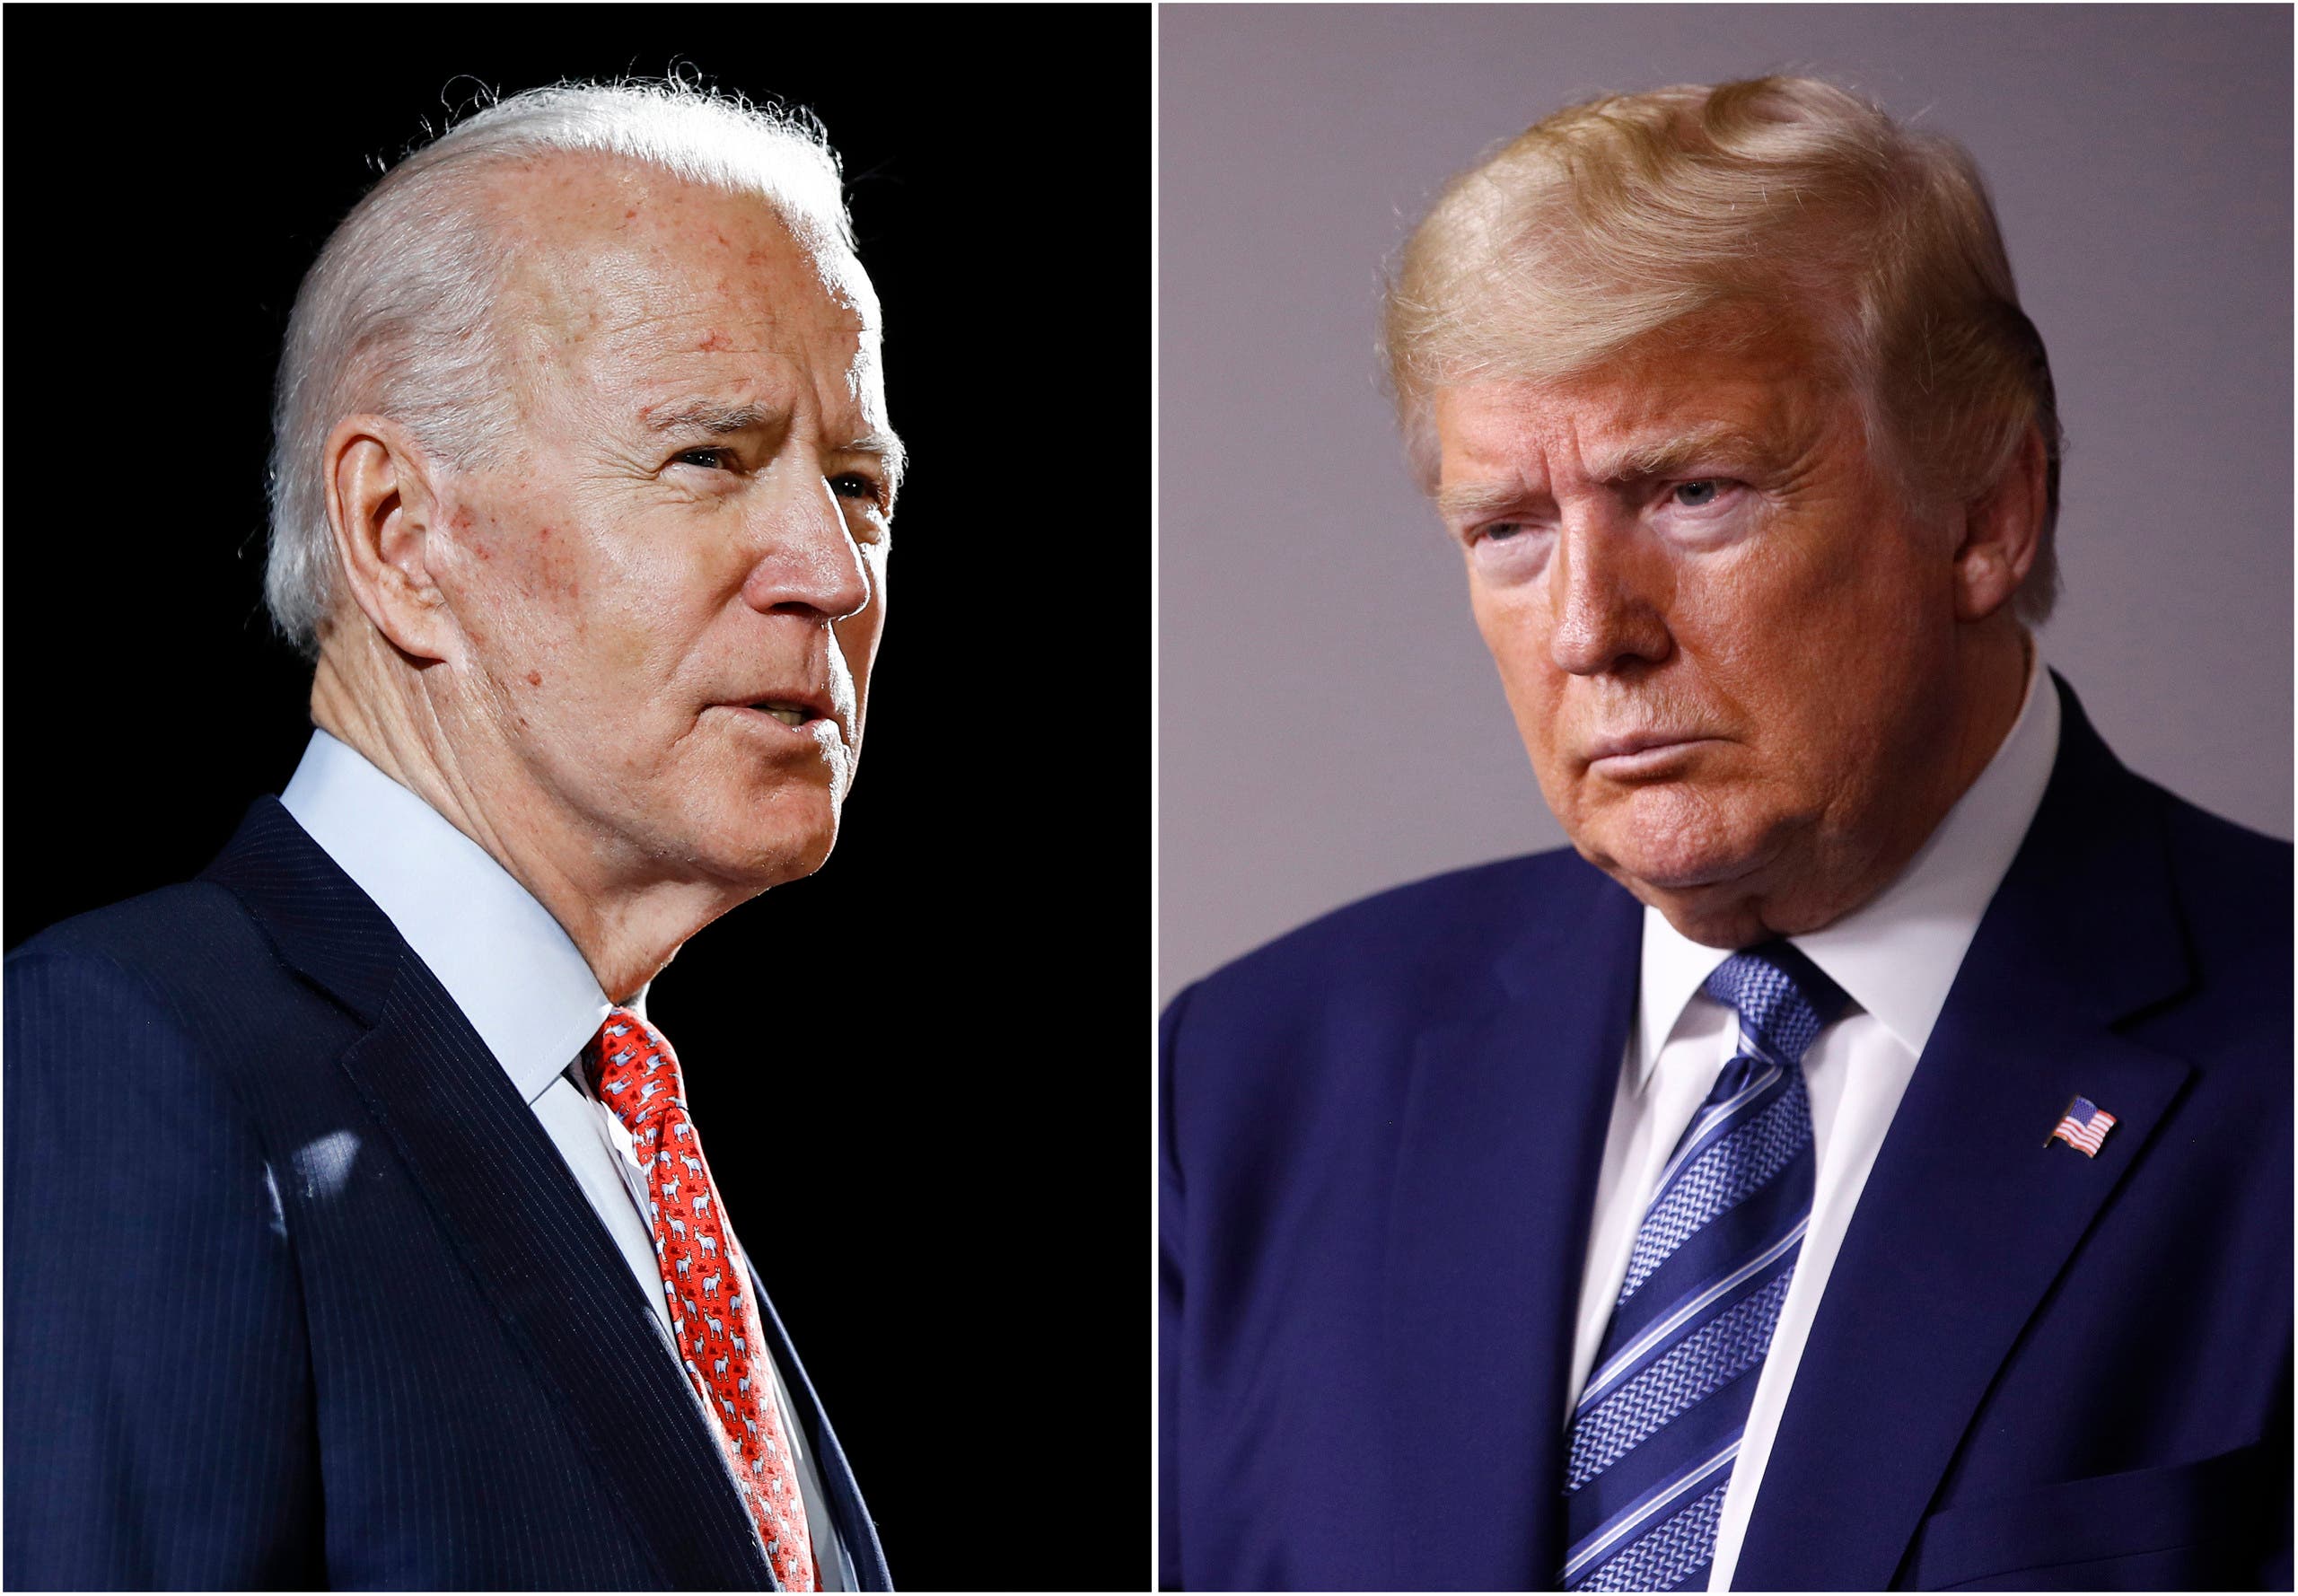 In this combination of file photos, former Vice President Joe Biden speaks in Wilmington, Del., on March 12, 2020, left, and President Donald Trump speaks at the White House in Washington on April 5, 2020. (File photo: AP)